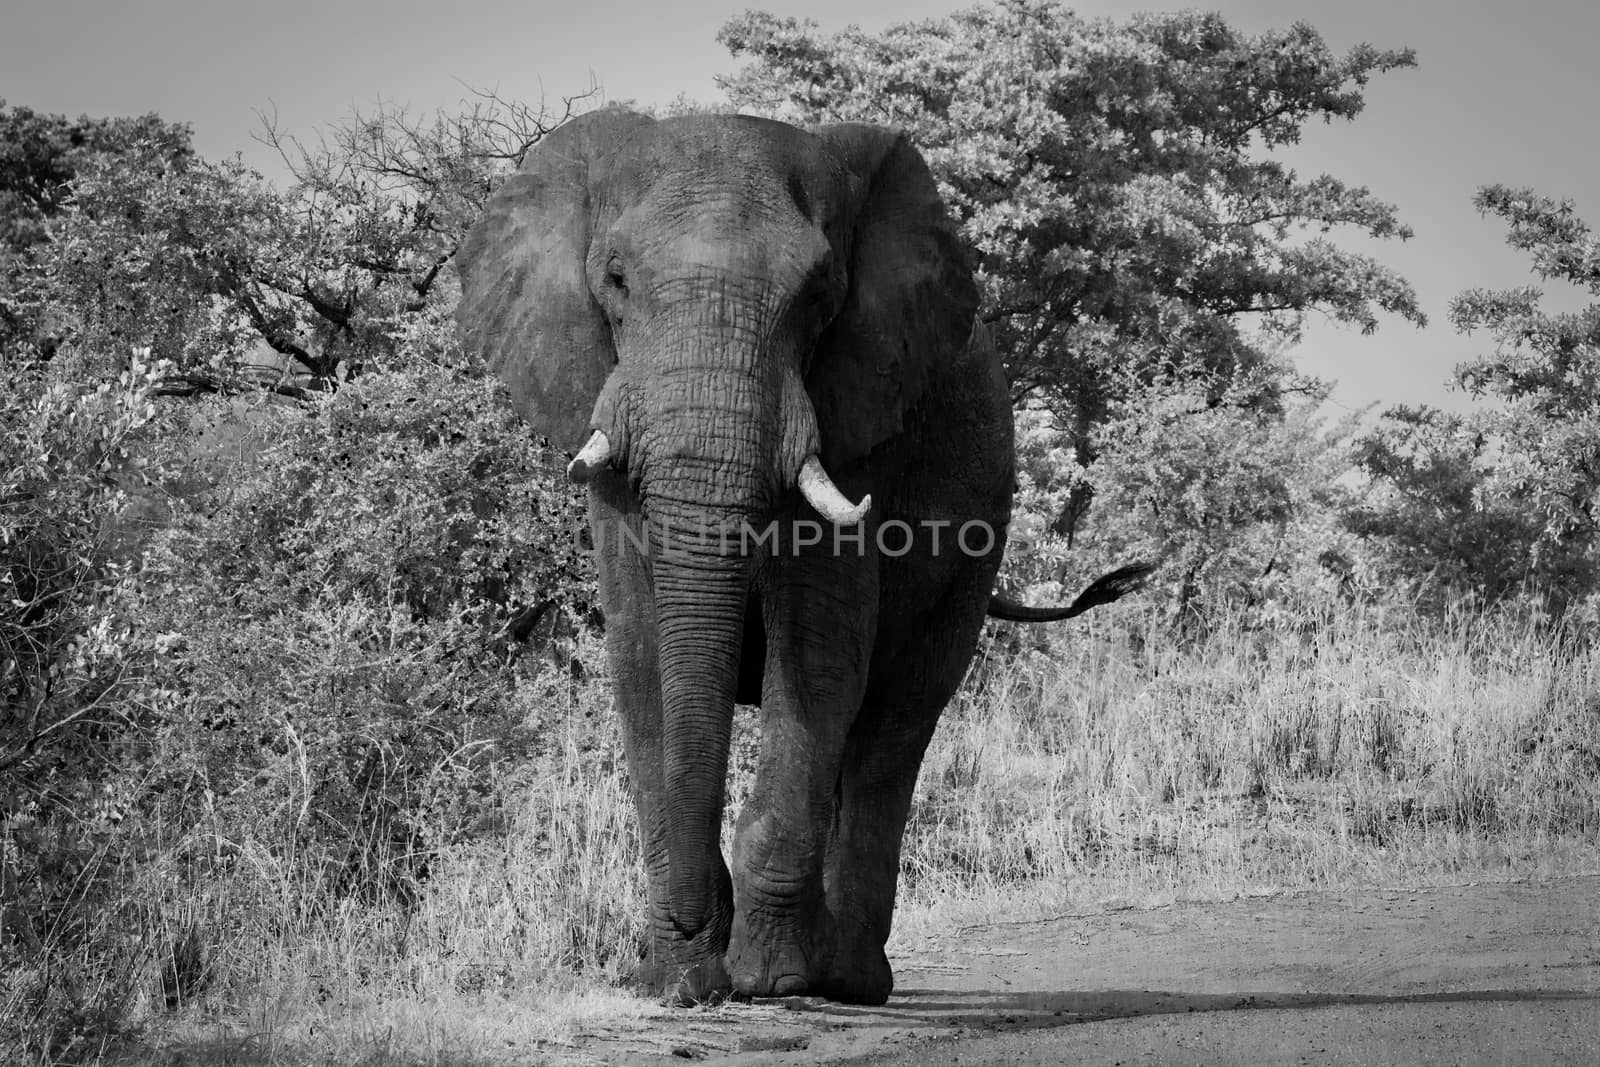 African Elephant walking towards the camera in black and white in the Kruger National Park, South Africa.